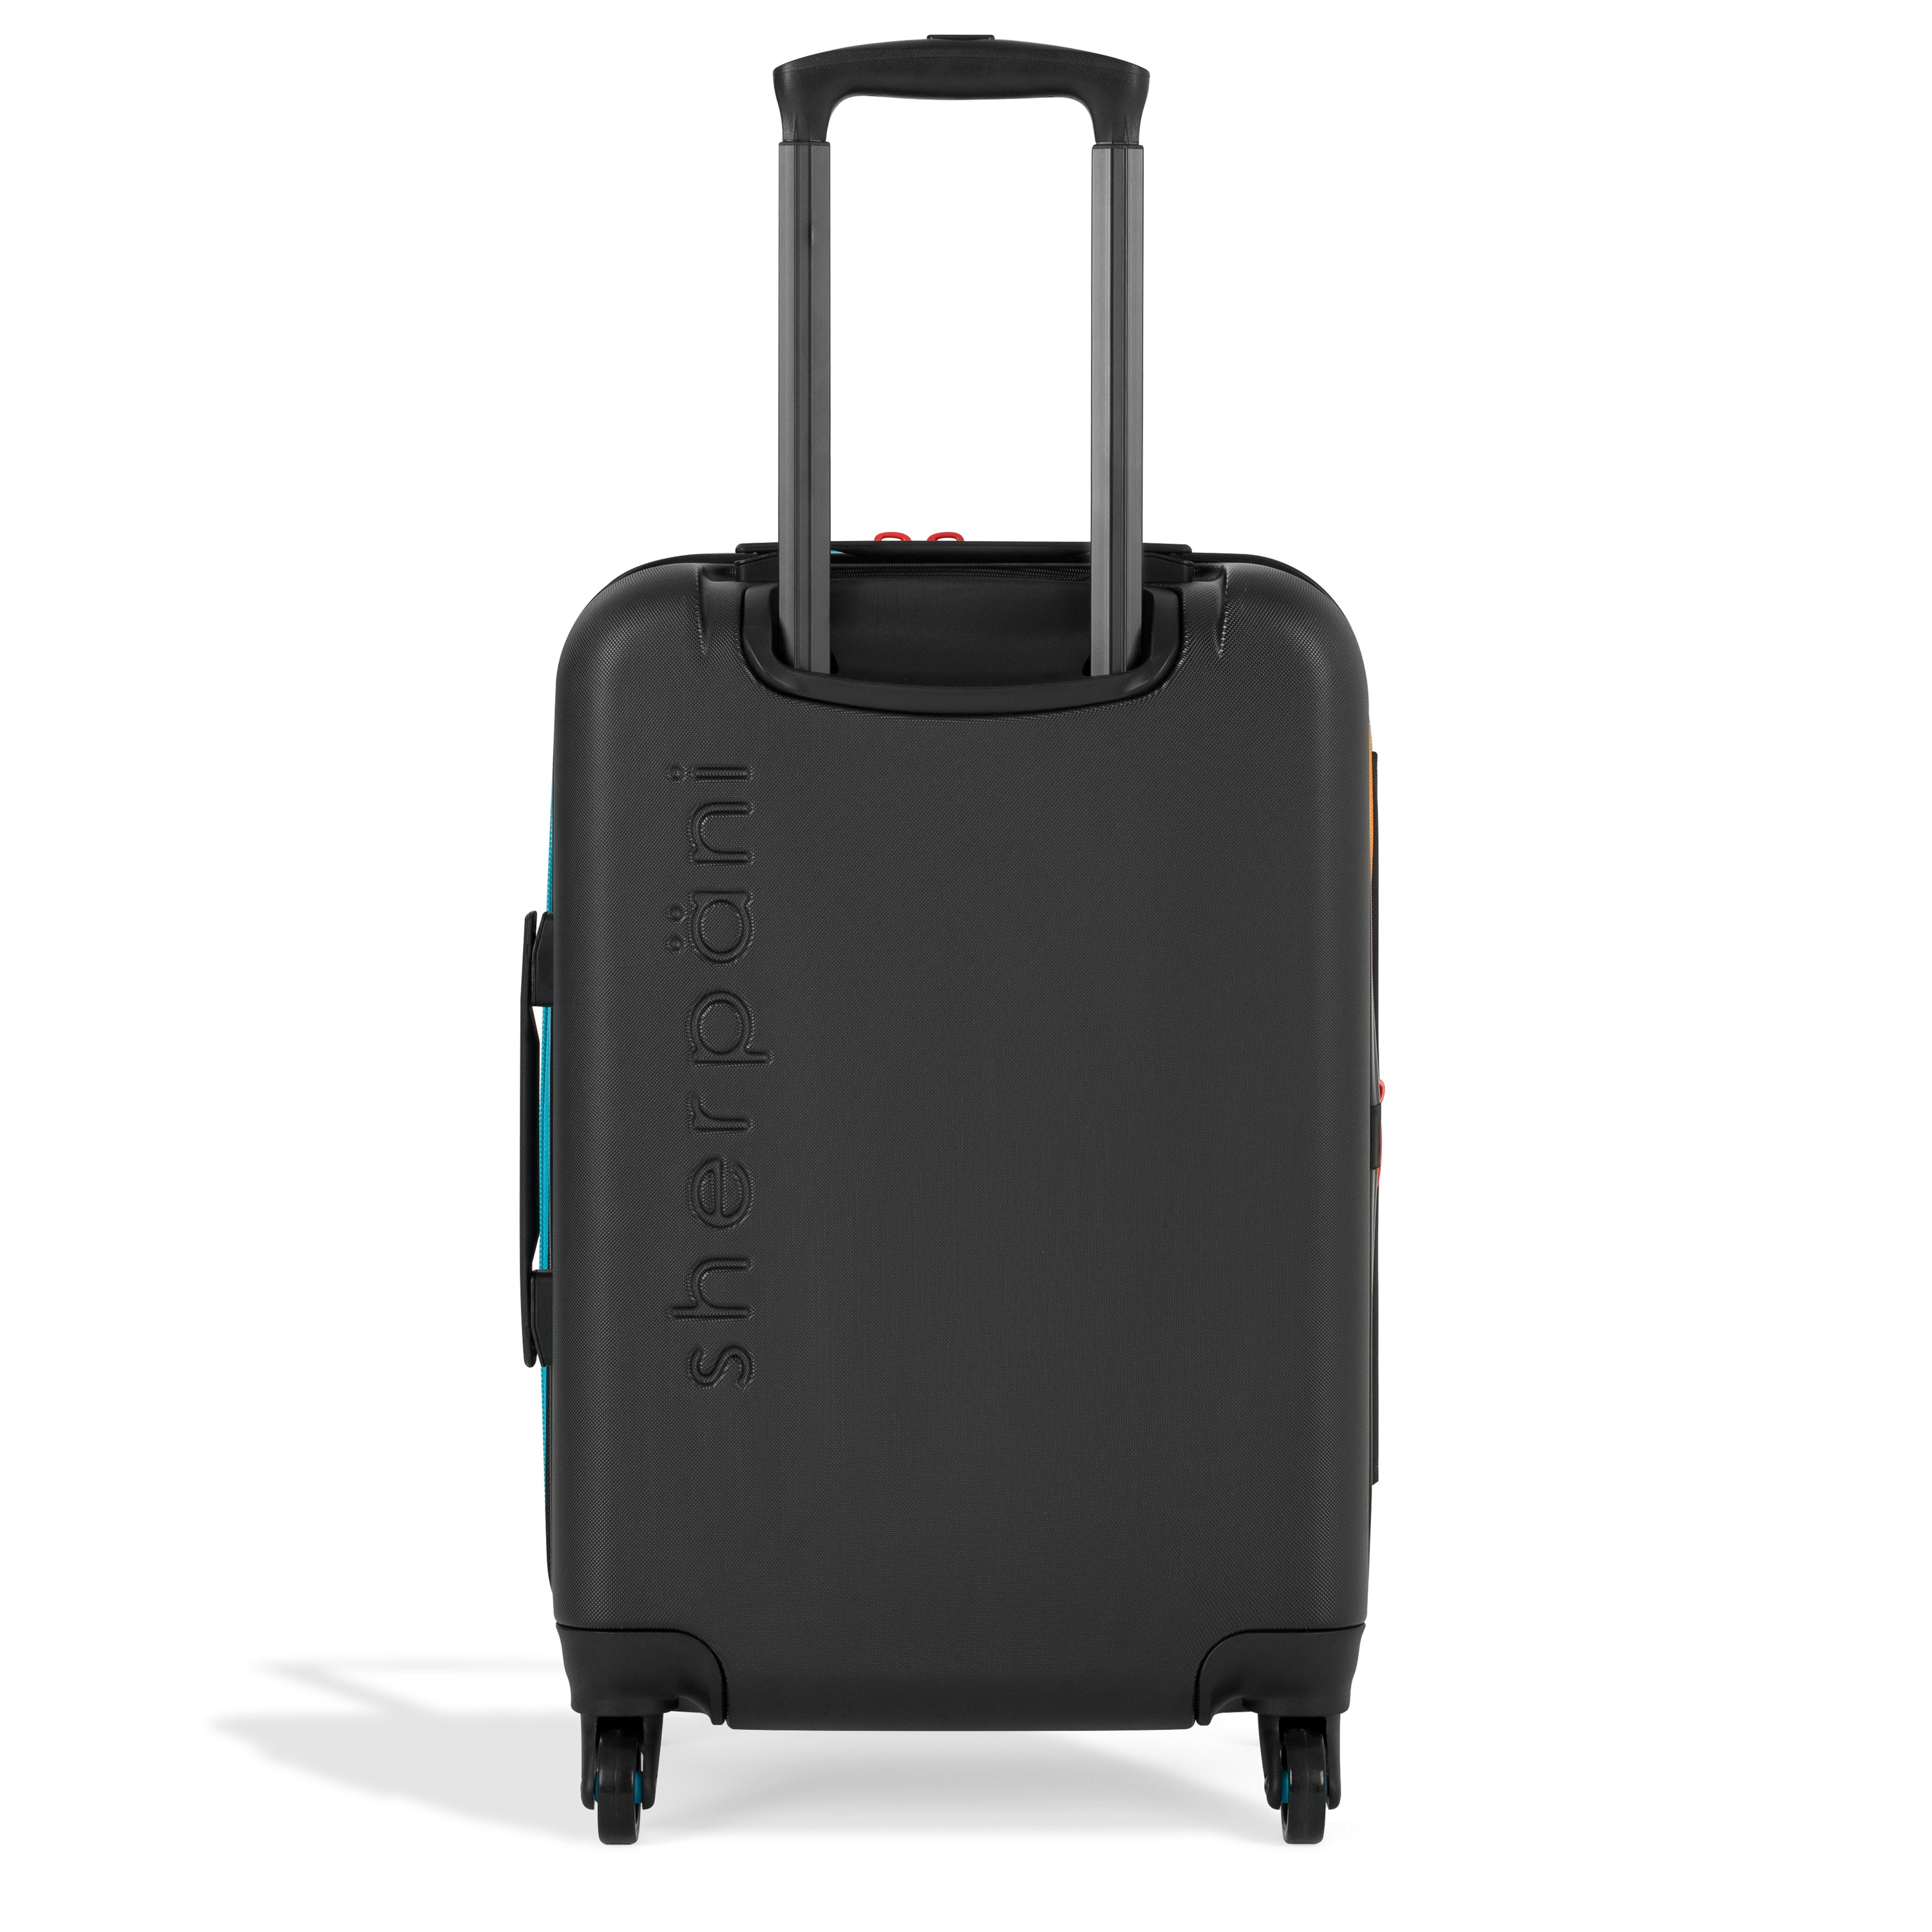 Back view of Sherpani hard-shell carry-on luggage, the Meridian in Chromatic. Meridian features include a retractable luggage handle, uncrushable exterior, TSA-approved locking zippers and four 36-degree spinner wheels. Chromatic color is primarily black with pops of color in red, yellow and blue. 